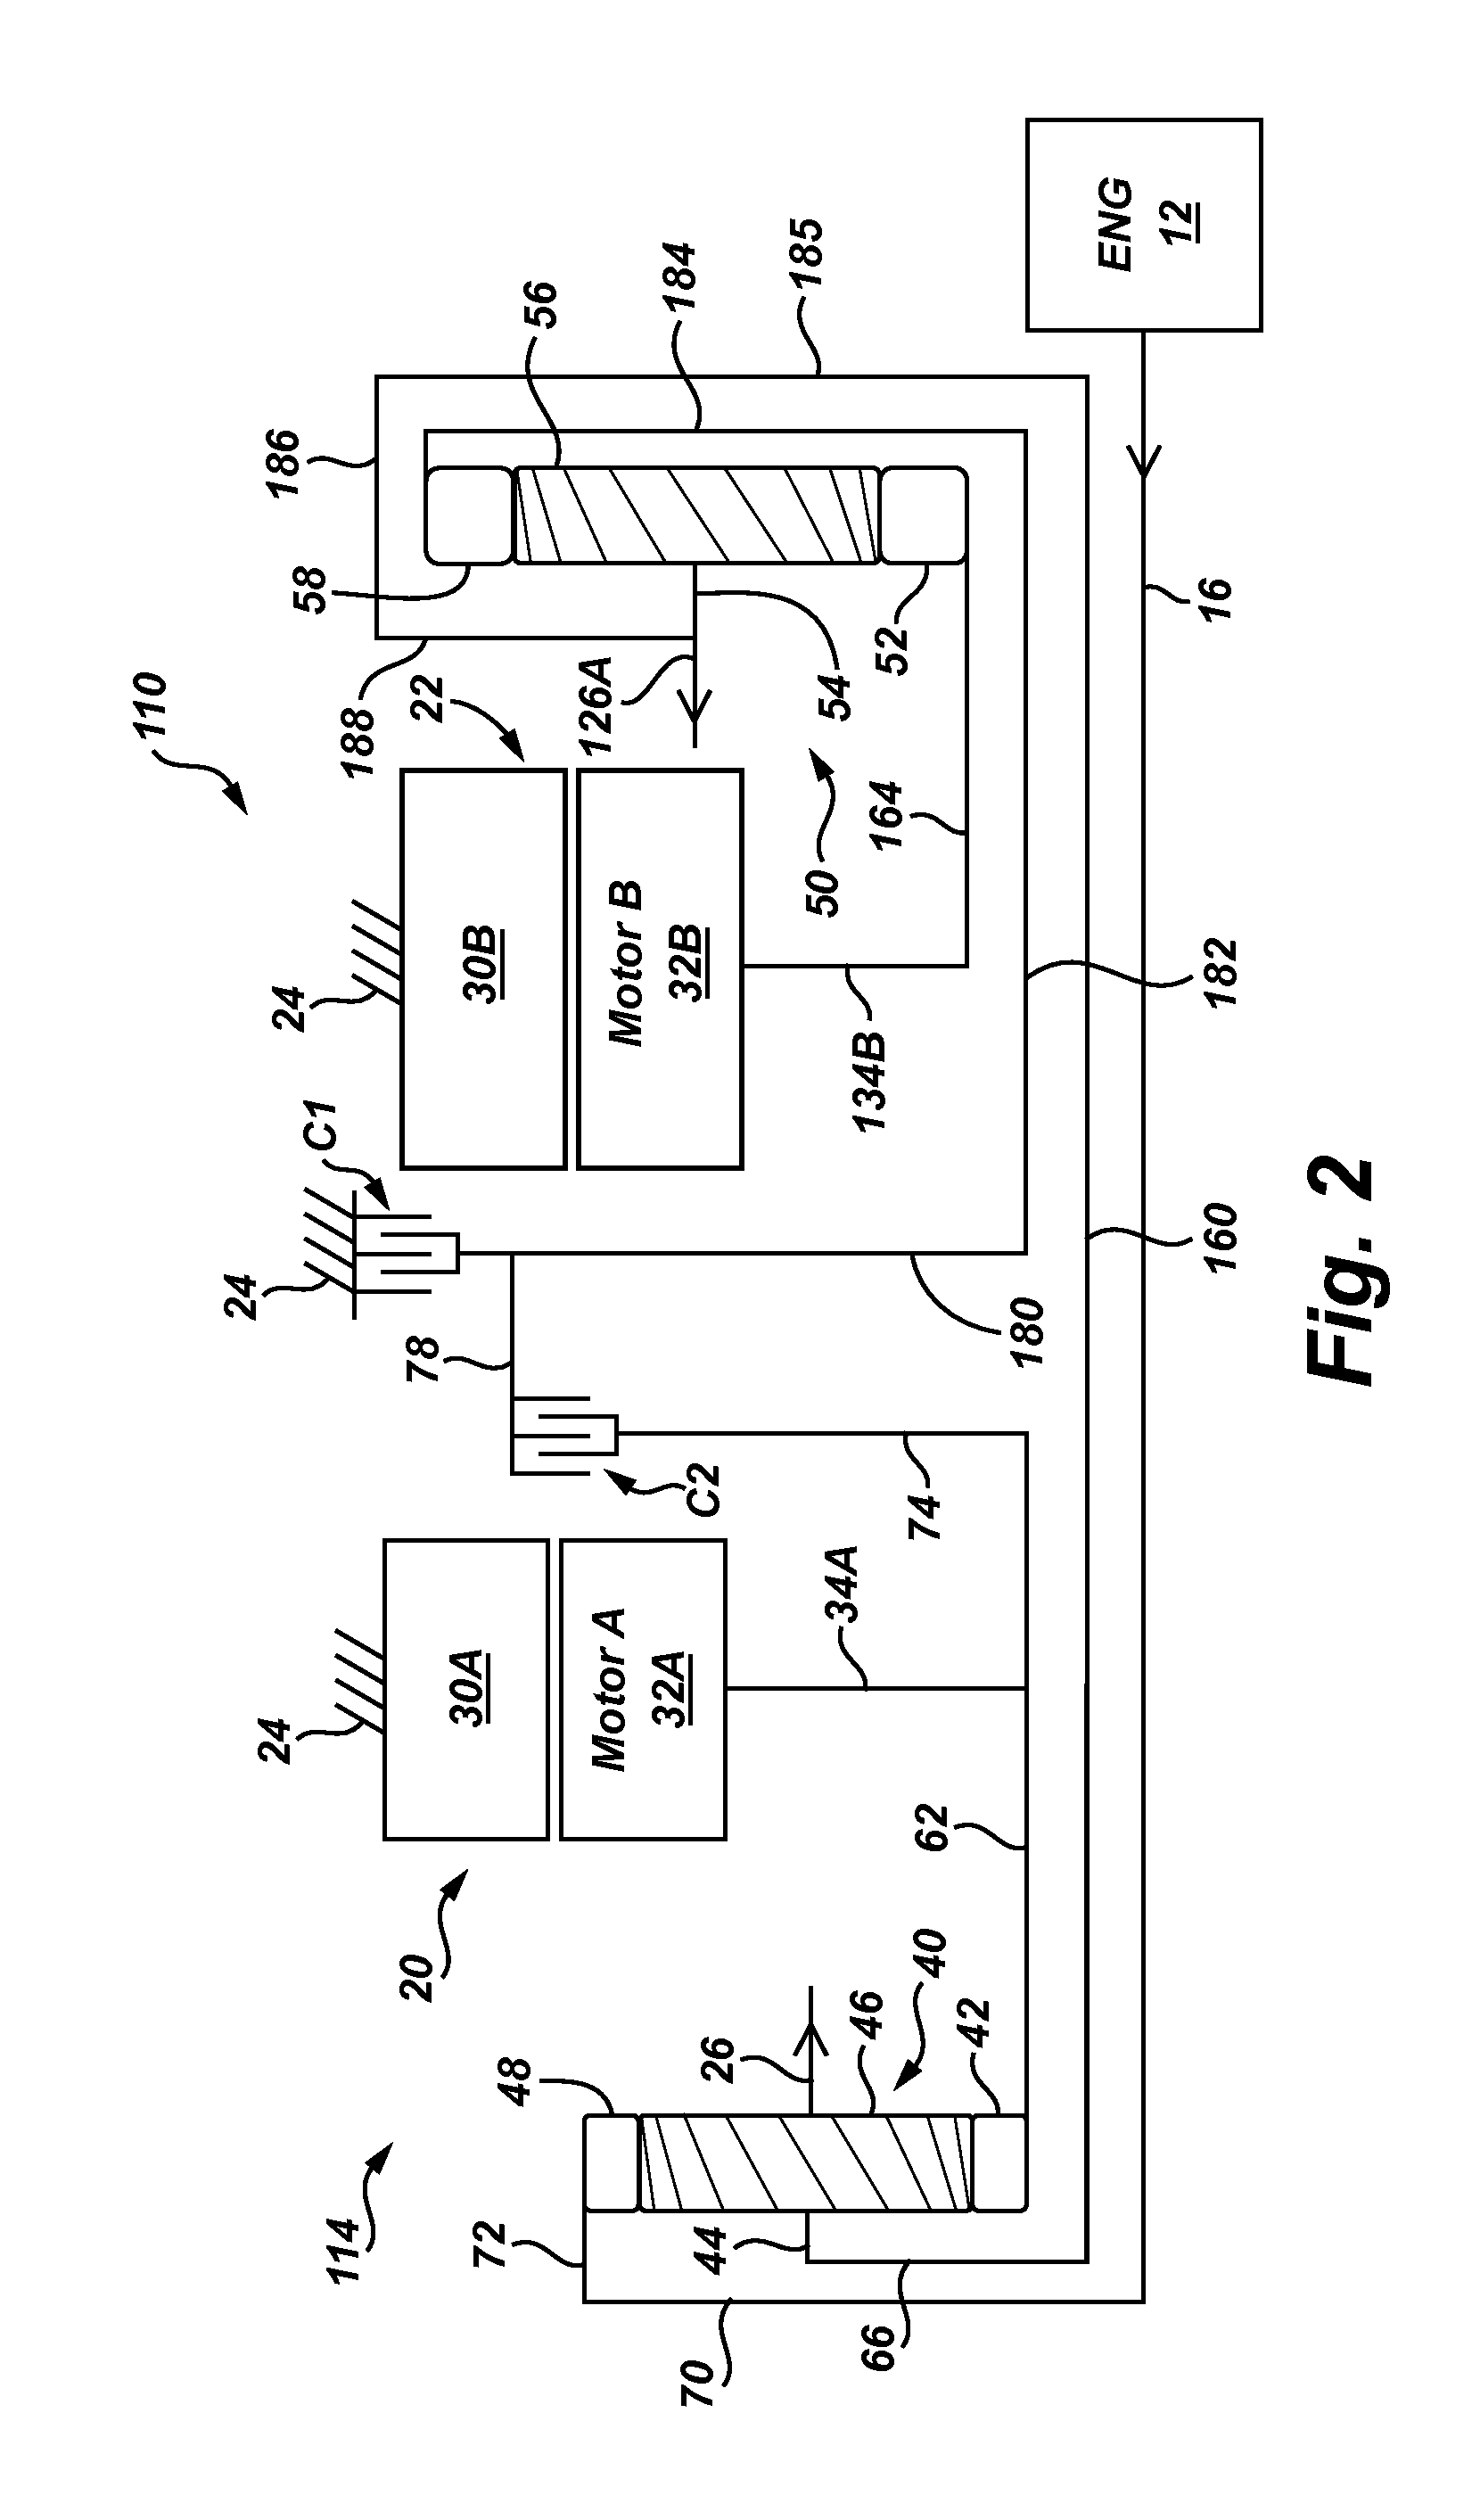 Electrically-variable transmission